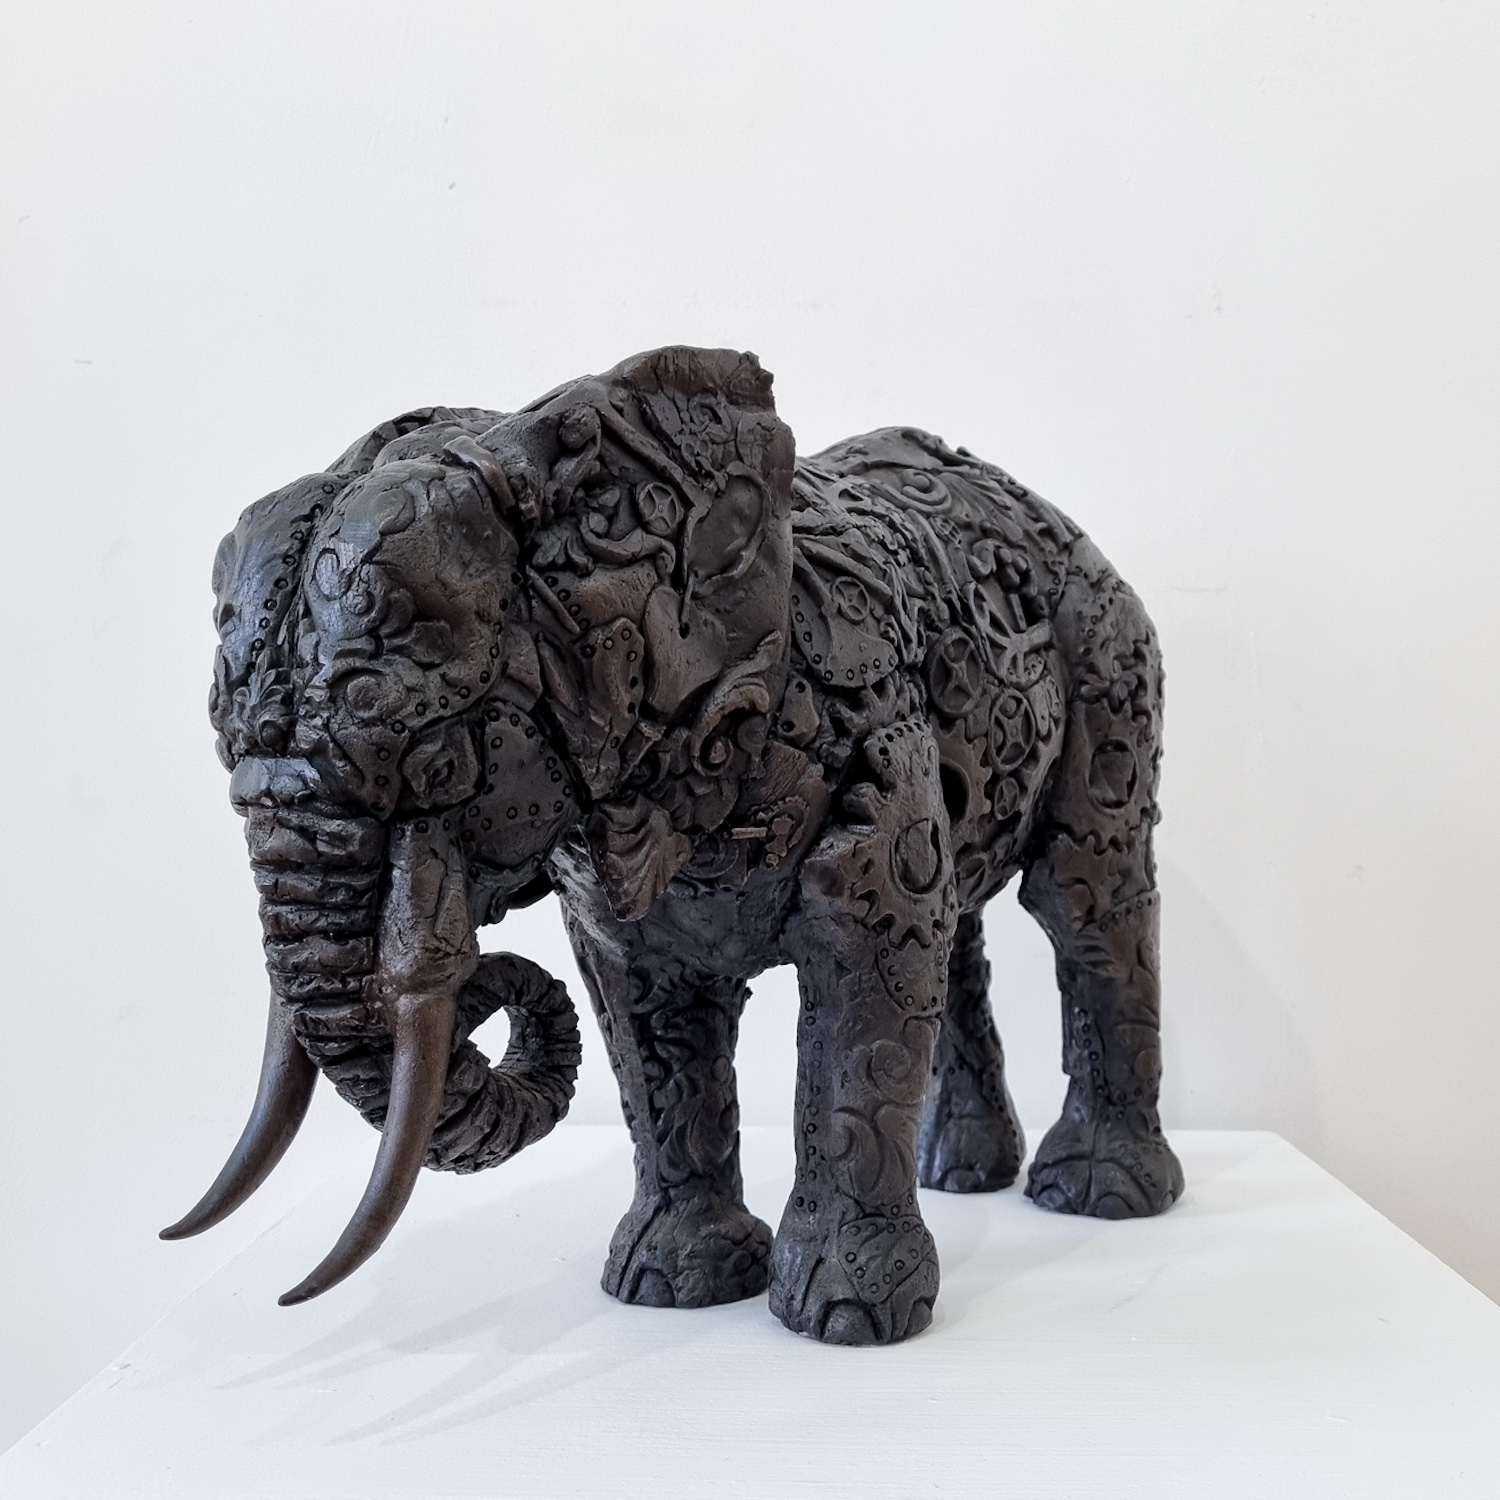 'Mechanical Elephant 10/25' by artist April Young